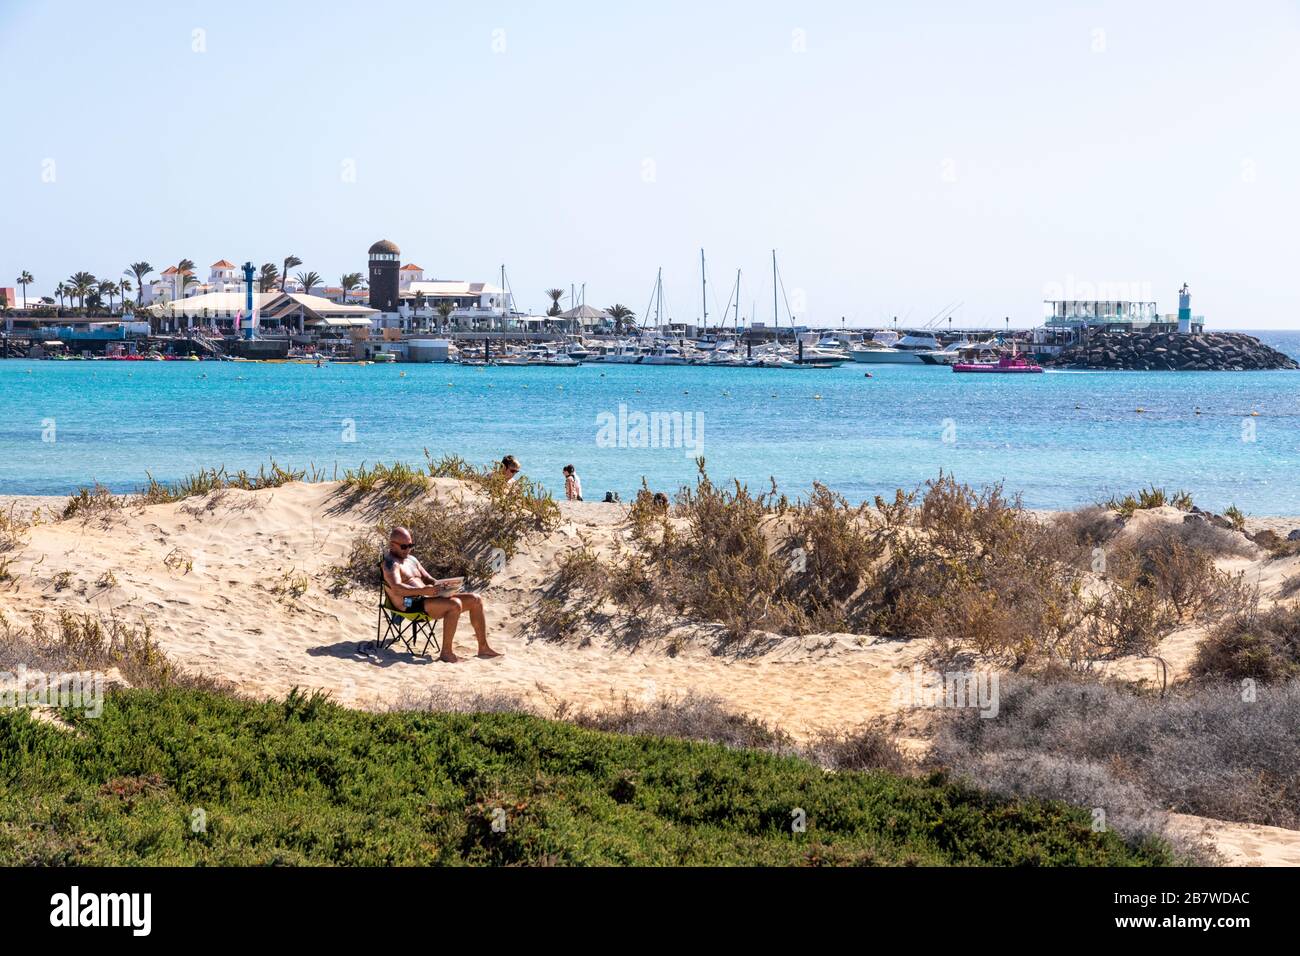 Looking across to the harbour at Caleta de Fuste on the east coast of the Canary Island of Fuerteventura Stock Photo